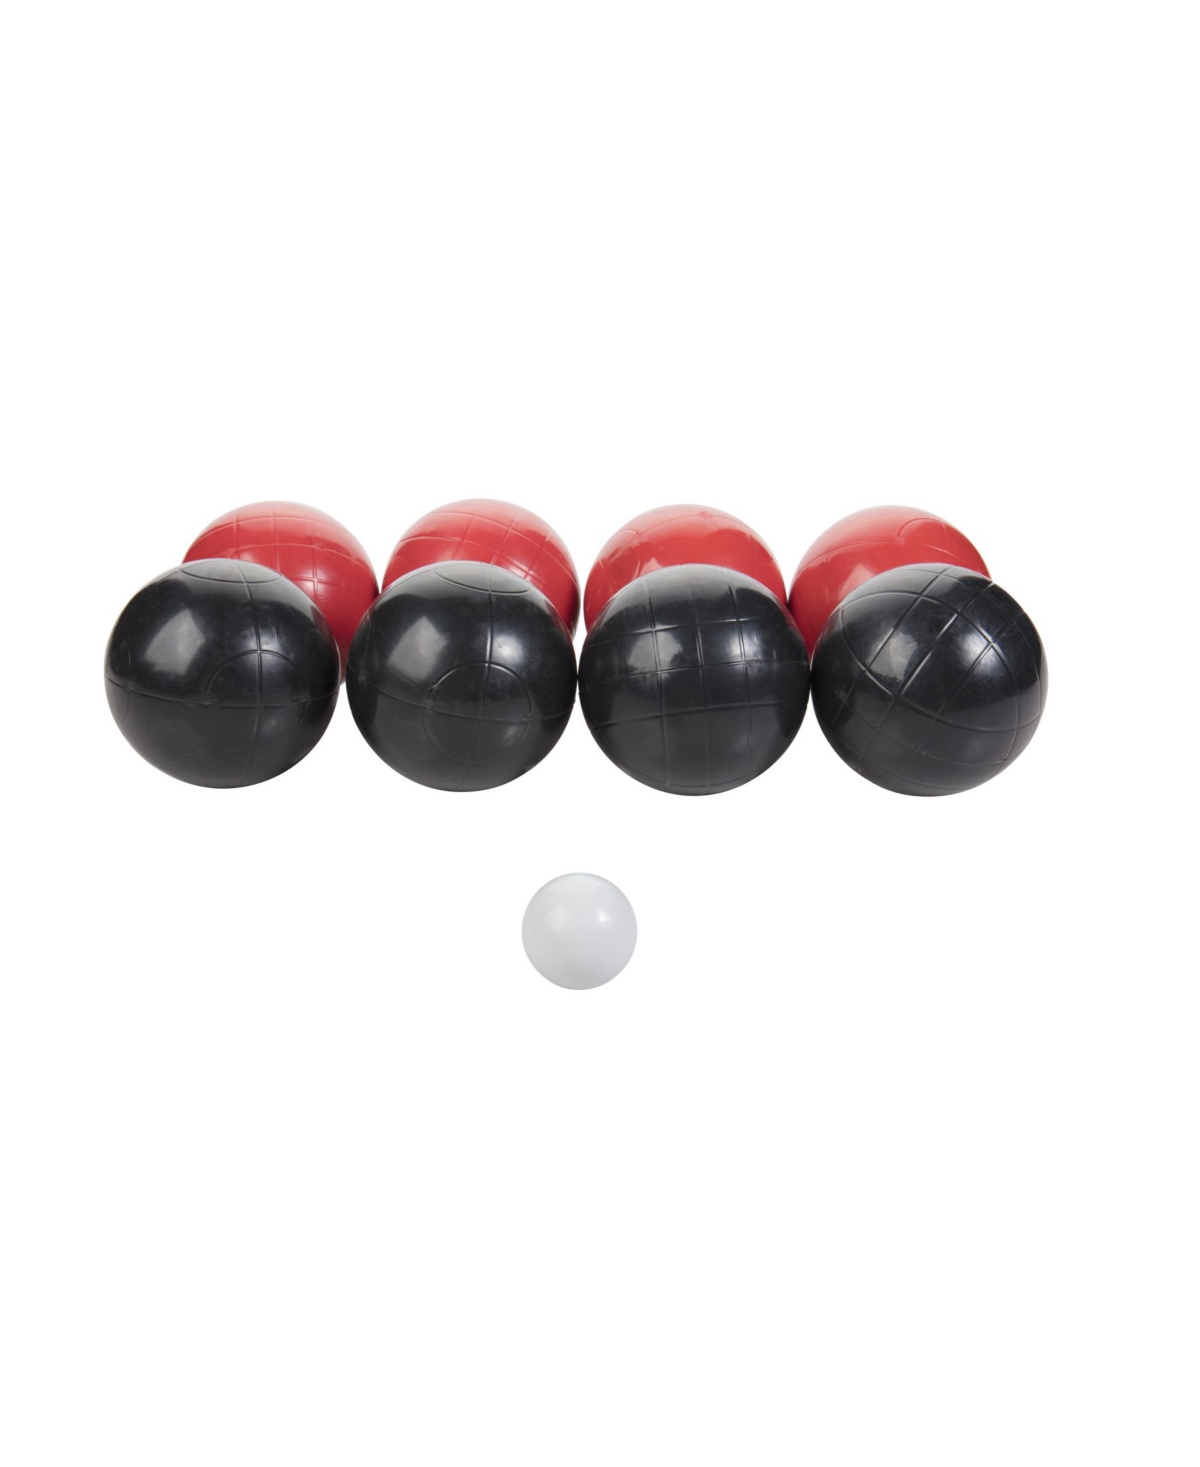 Viva Sol Triumph Recreational Outdoor Bocce Ball Set Includes 8 Bocce Balls, Jack, And Sports Carry Bag In Multi